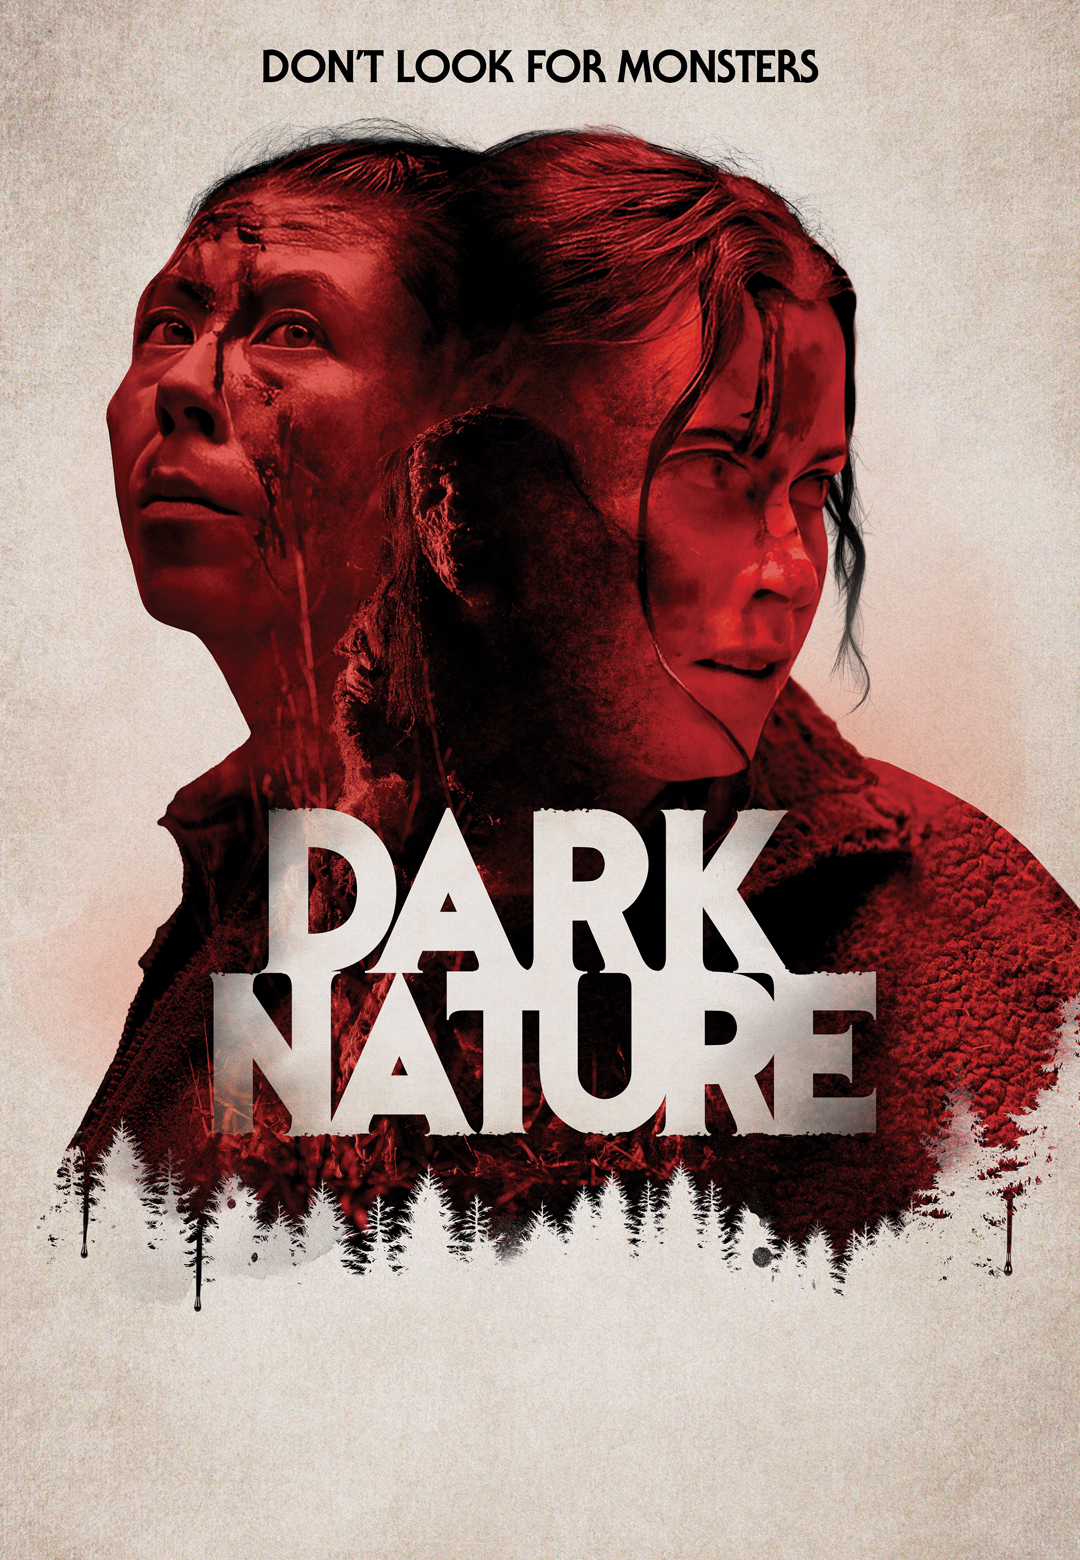 From Camping to Creepy – Review on Dark Nature